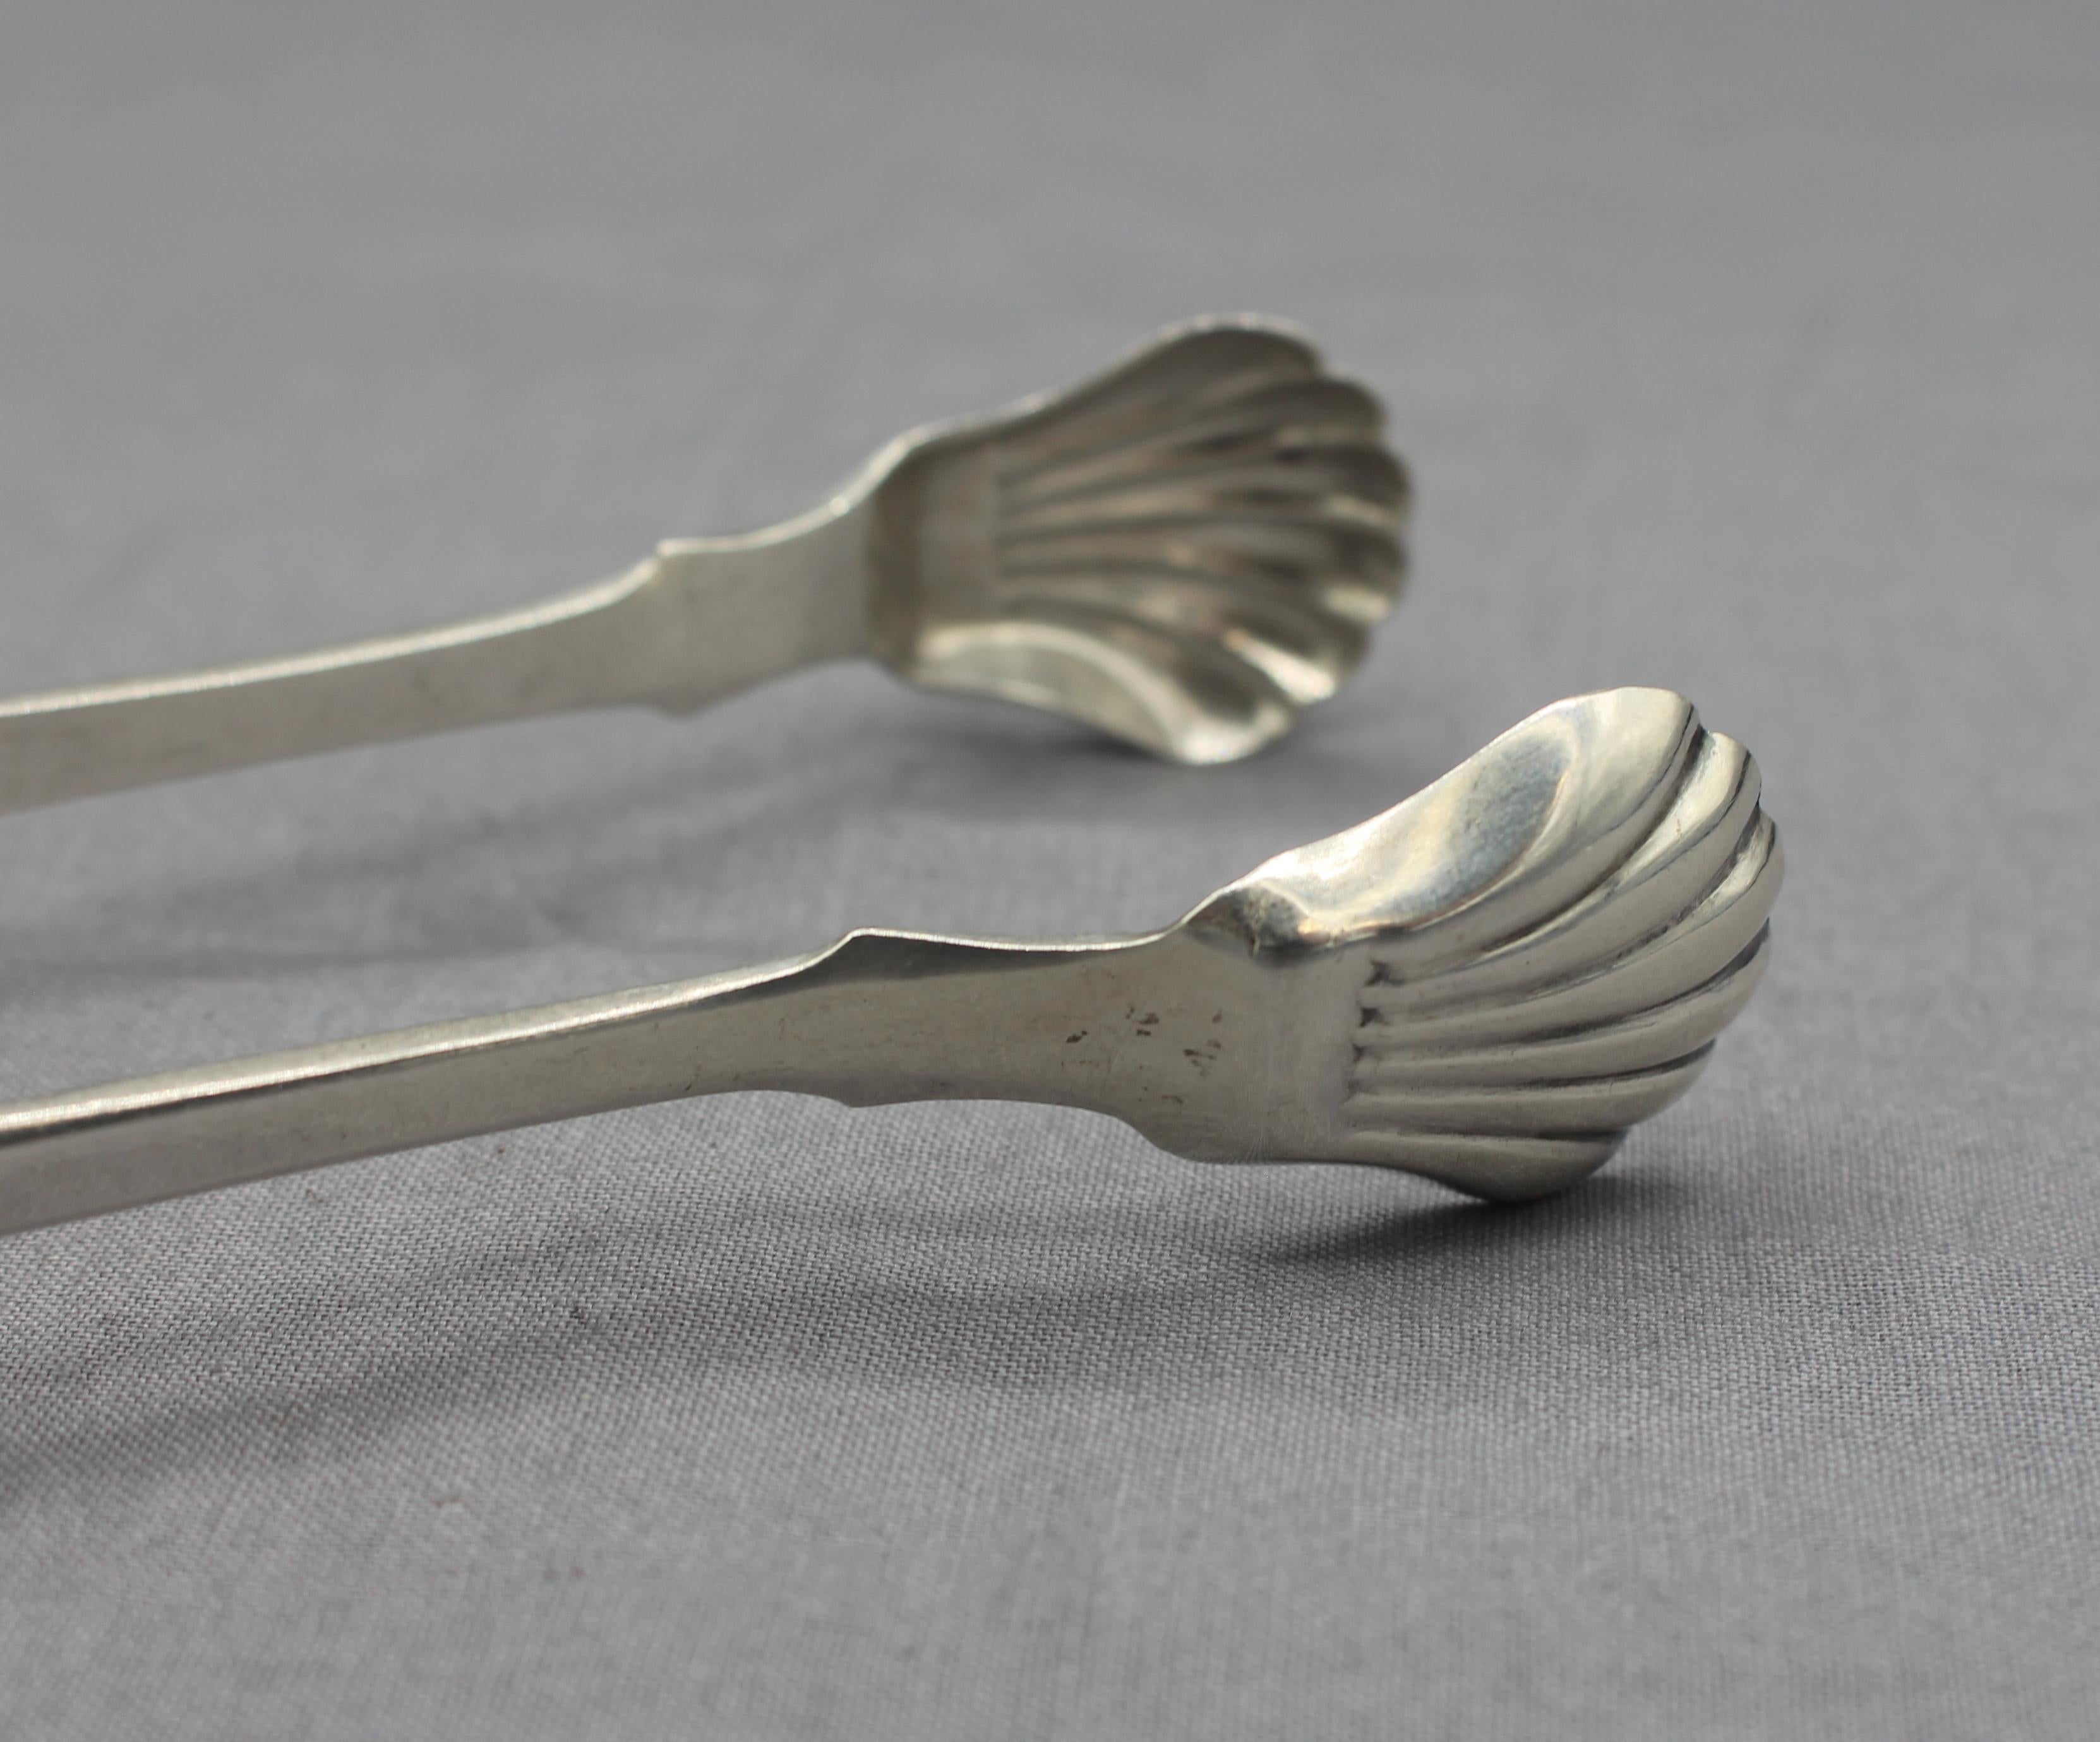 Coin silver sugar tongs by Robert & William Wilson, Philadelphia, c.1830s. Wonderful design - thistle engraved, shell end. No doubt for a client of Scottish ancestry! Monogram: MAB. 1.30 troy oz.
6.5